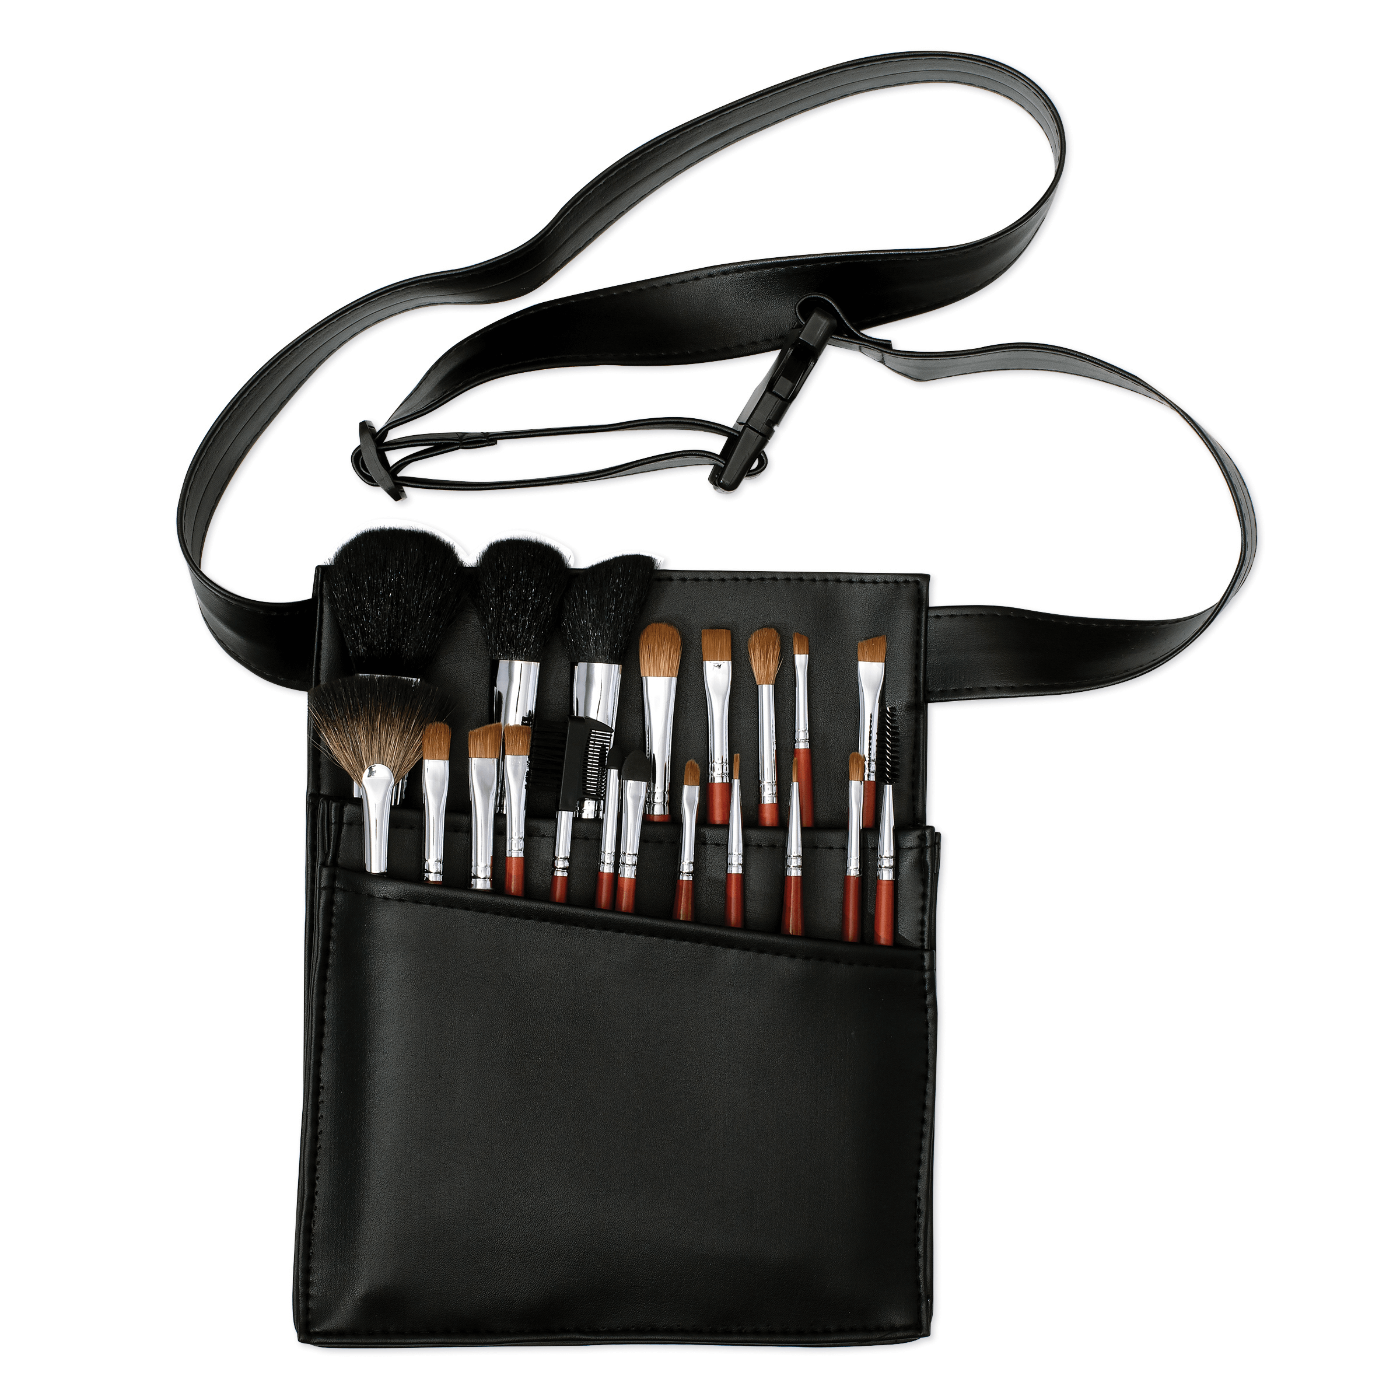 Makeup Brush Set with Pouch - 20 pc.